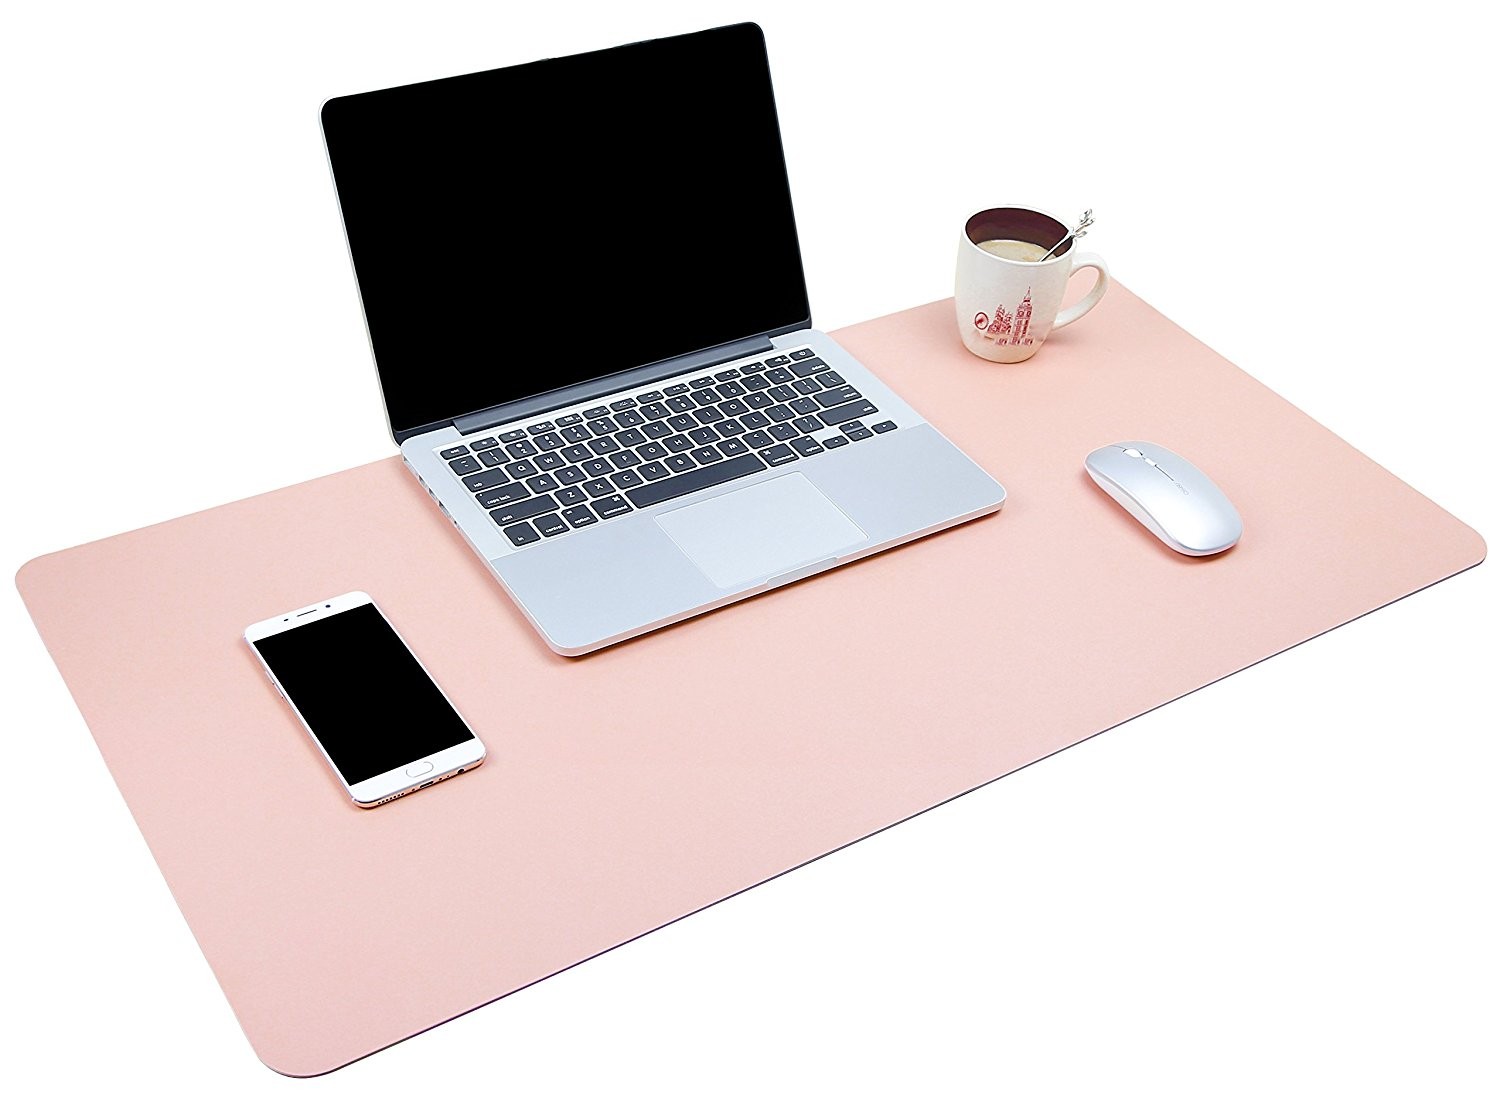 8.66, 2 Pack, Pink YSAGI Mouse Pads Pack with Non-Slip Office/Home Ultra Thin Waterproof PU Leather Mouse Pad,Stitched Edges,Works for Computers Laptop,All Types of Mouse pad 